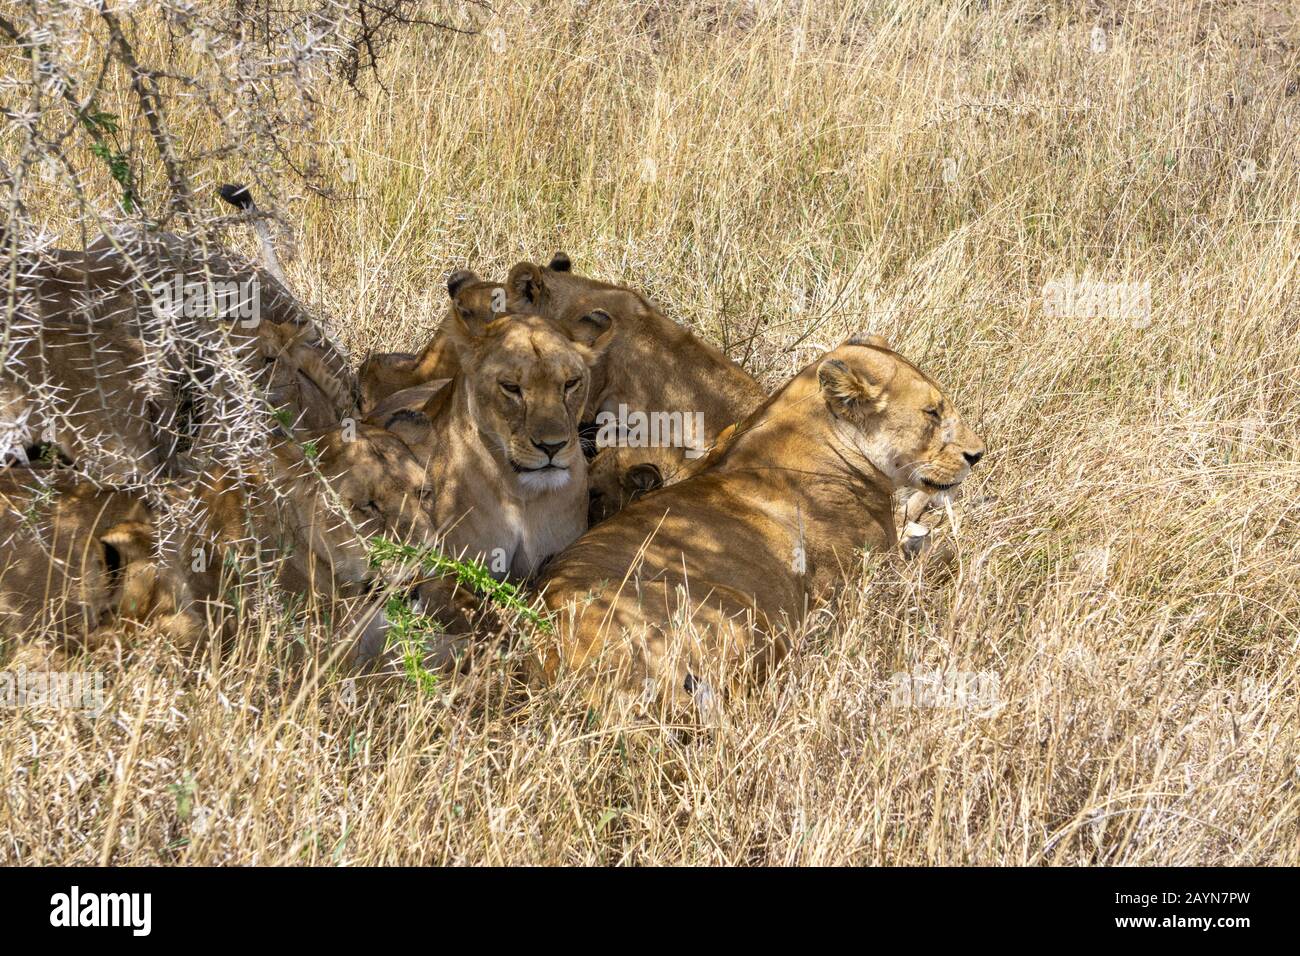 Lion family resting under a tree in Serengeti National Park, Tanzania, Africa. Stock Photo